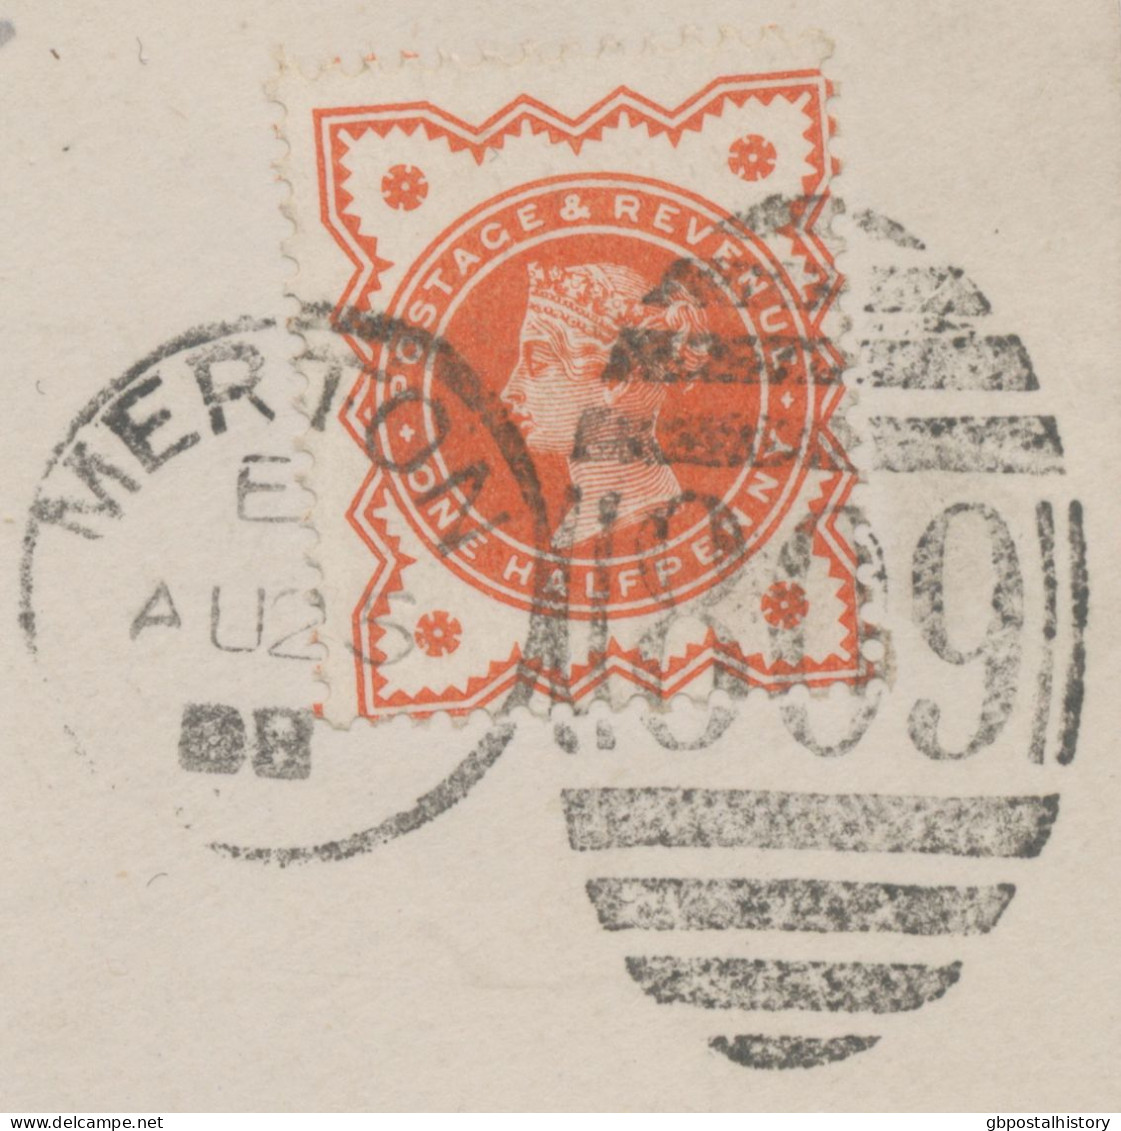 GB 1888 QV Jubilee ½d Vermilion On VF Cover With Barred Duplex-cancel "MERTON / 809" (Merton, Surrey) RARE POSTAGE RATE - Storia Postale